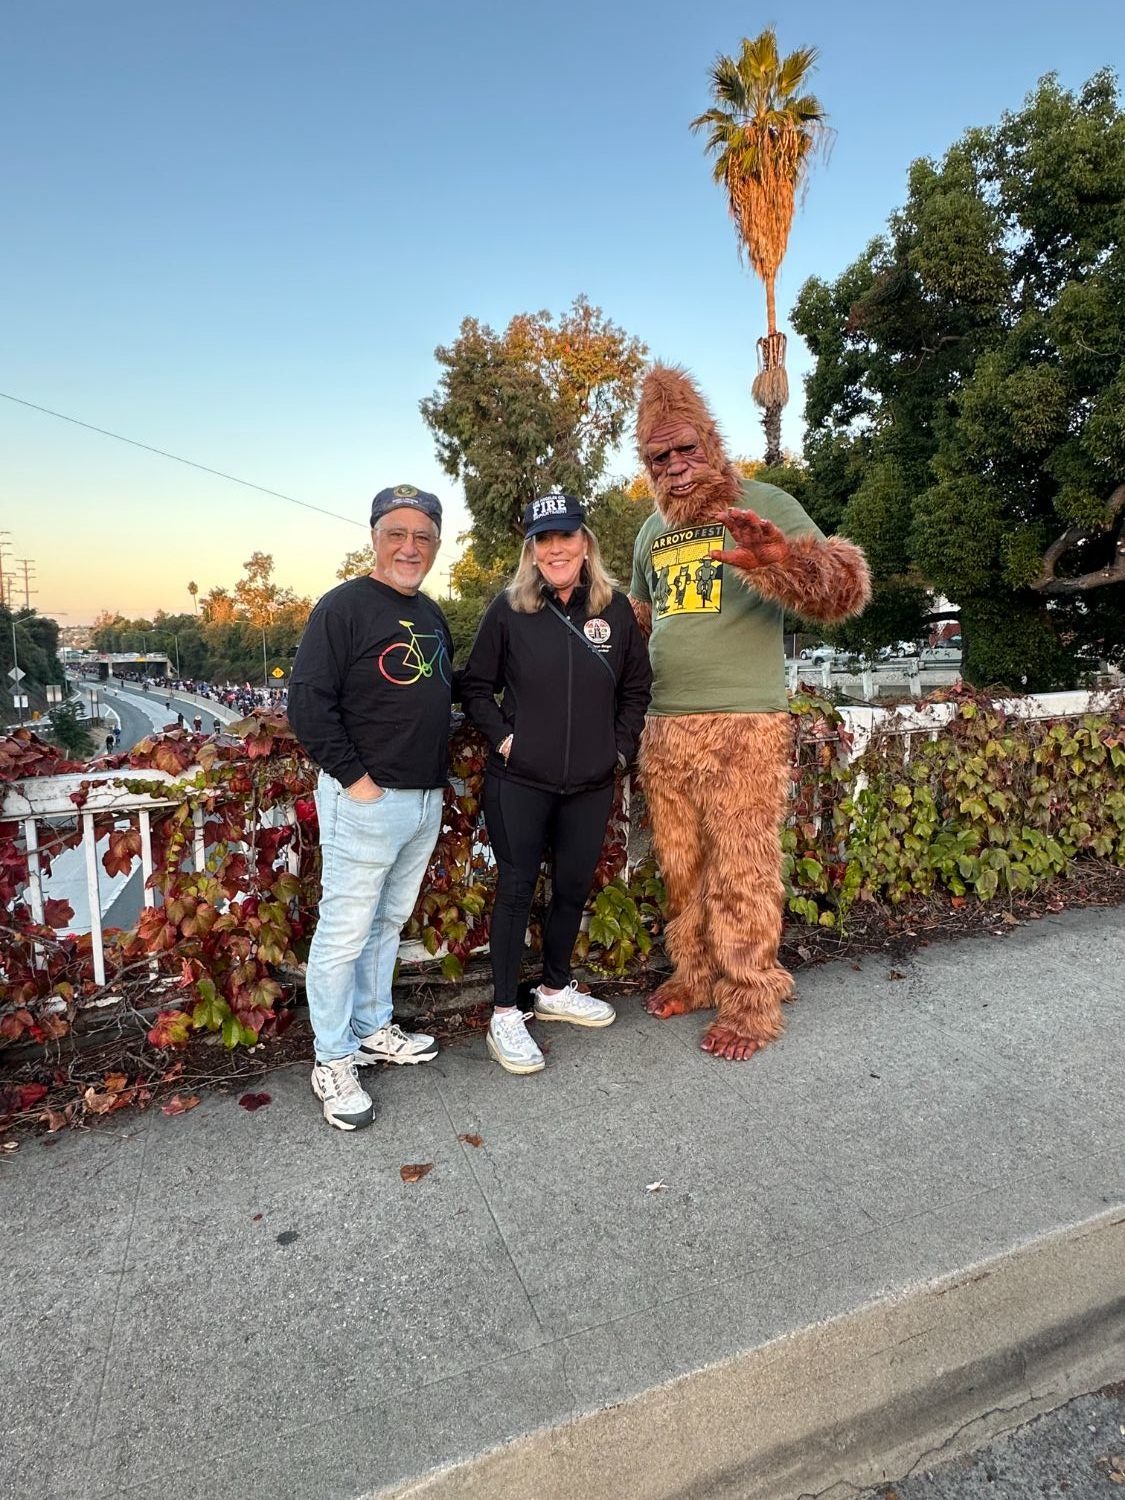 PHOTO: Bill Glazier | The South Pasadenan | Senator Anthony Portantino and Supervisor Kathryn Barger with Bigfoot at ArroyoFest 2023.